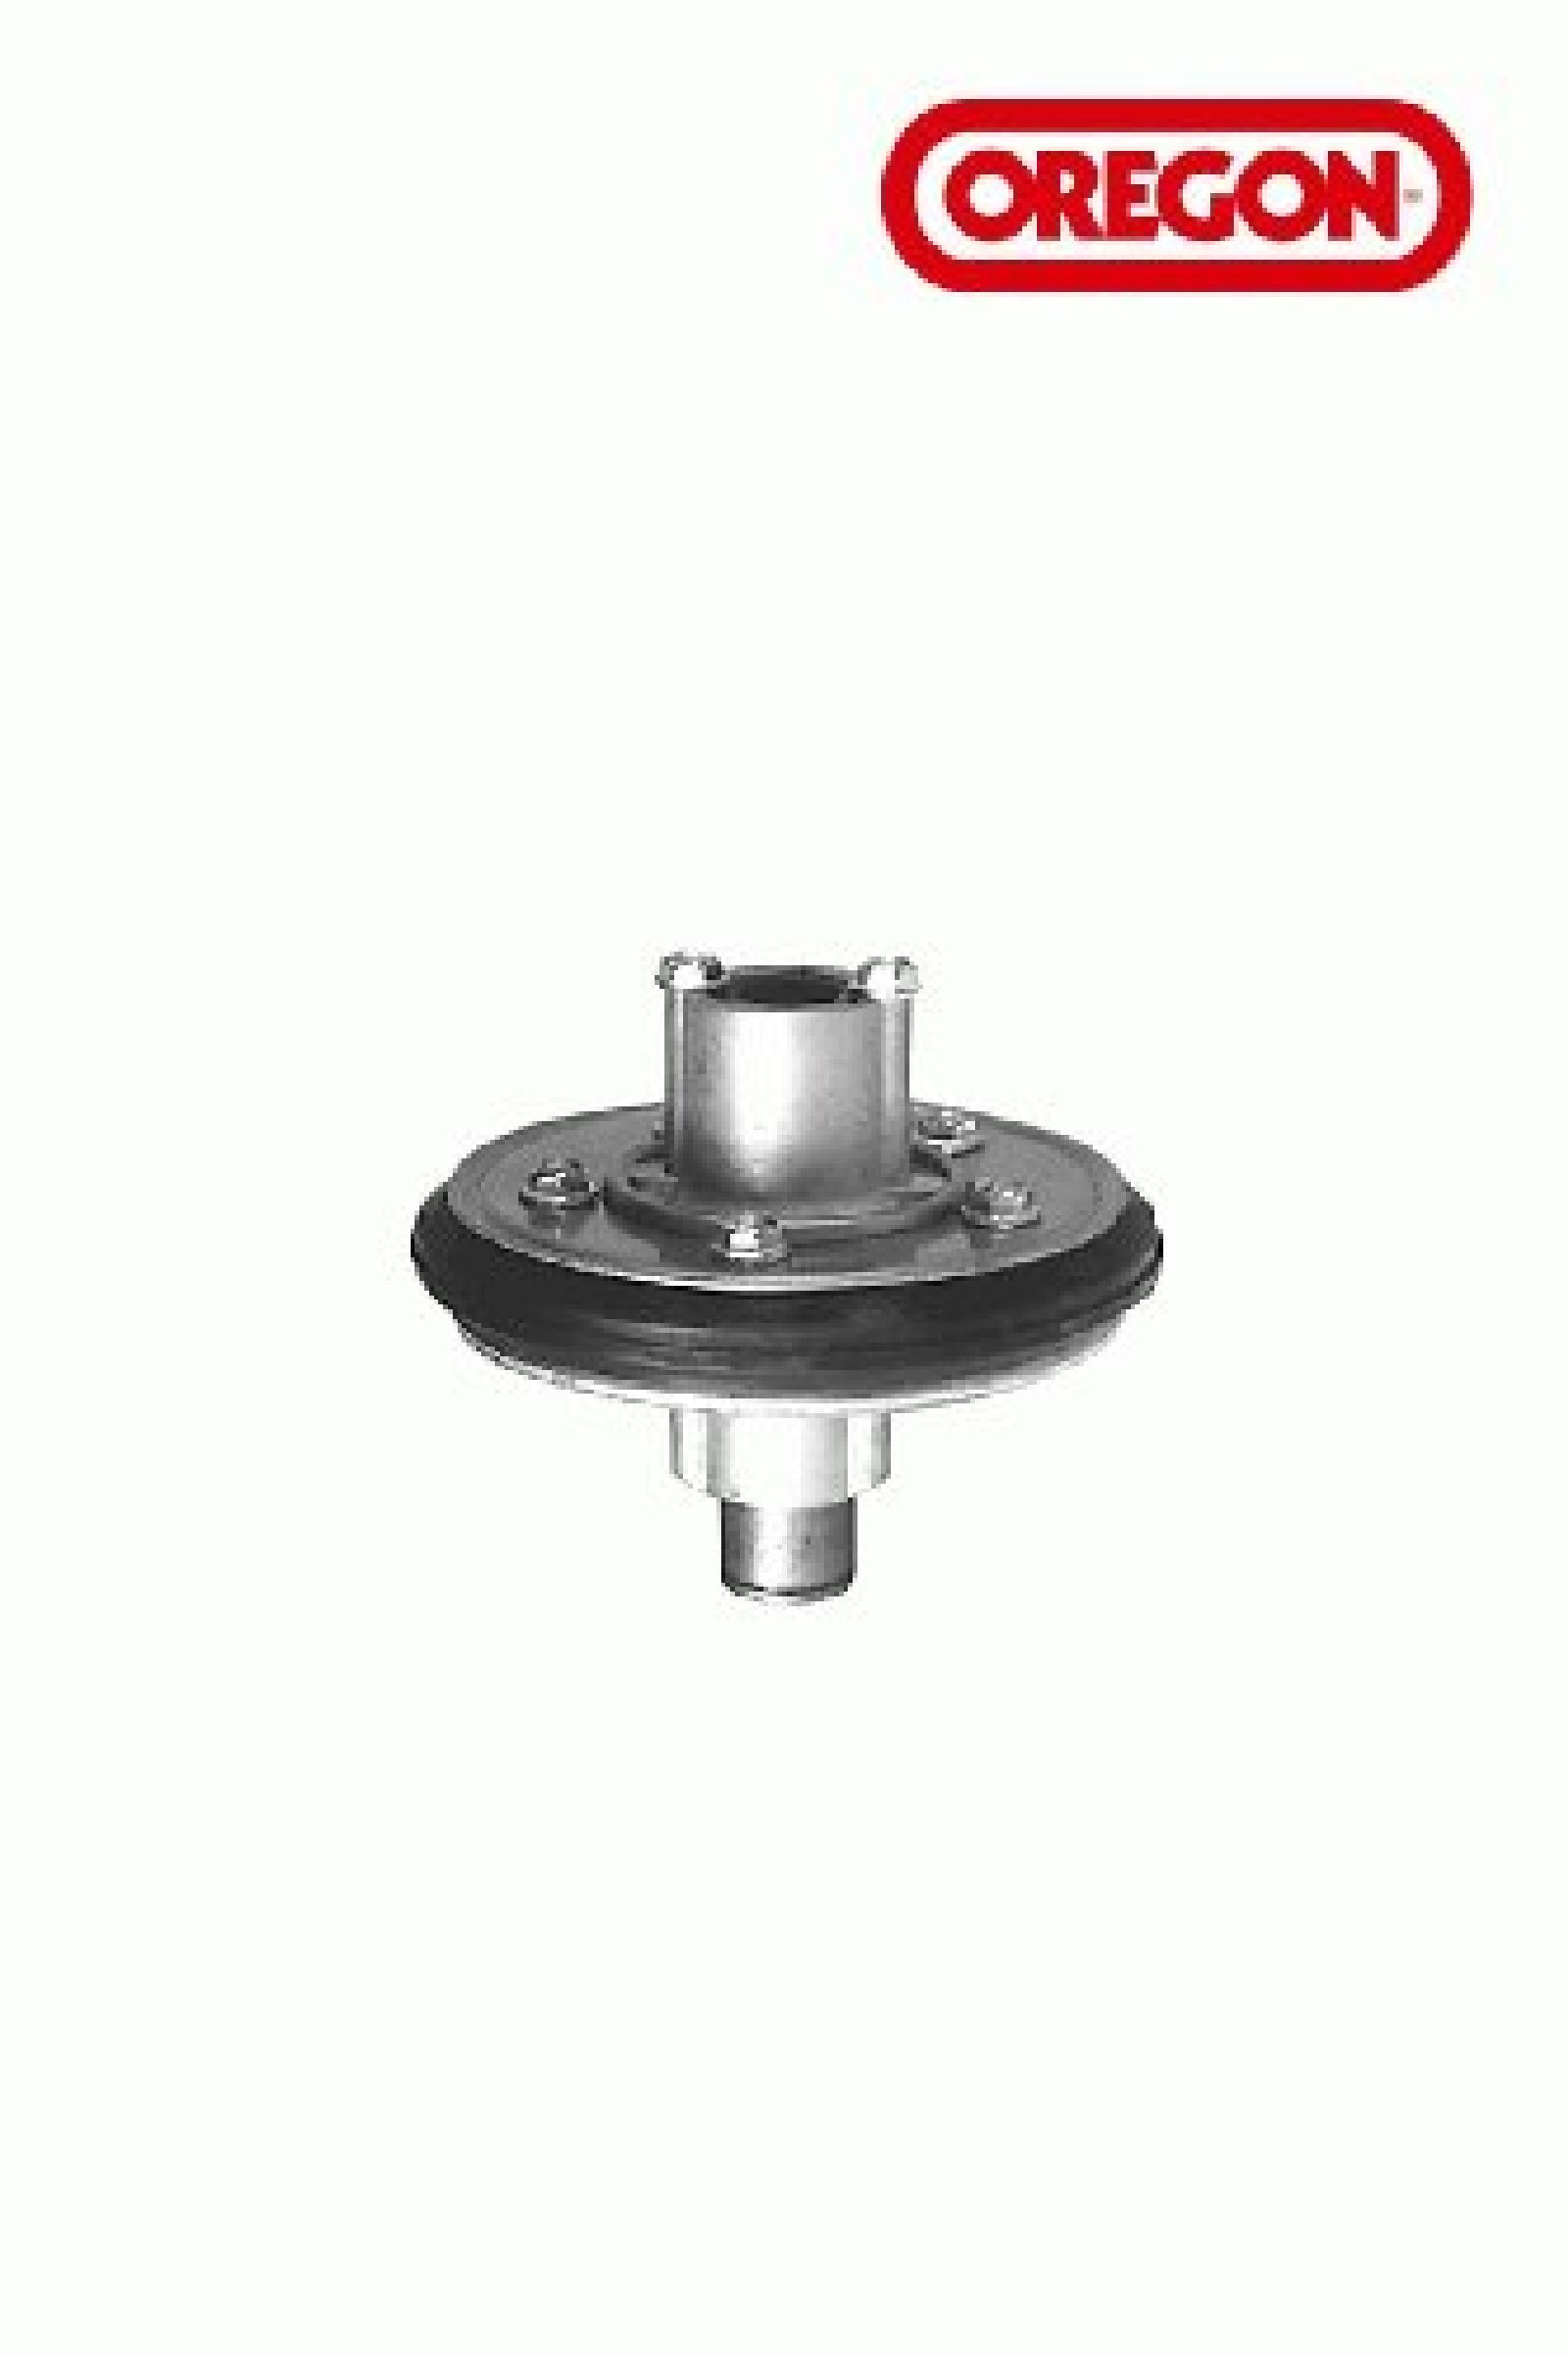 DRIVE DISK HUB AND RING part# 51-011 by Oregon